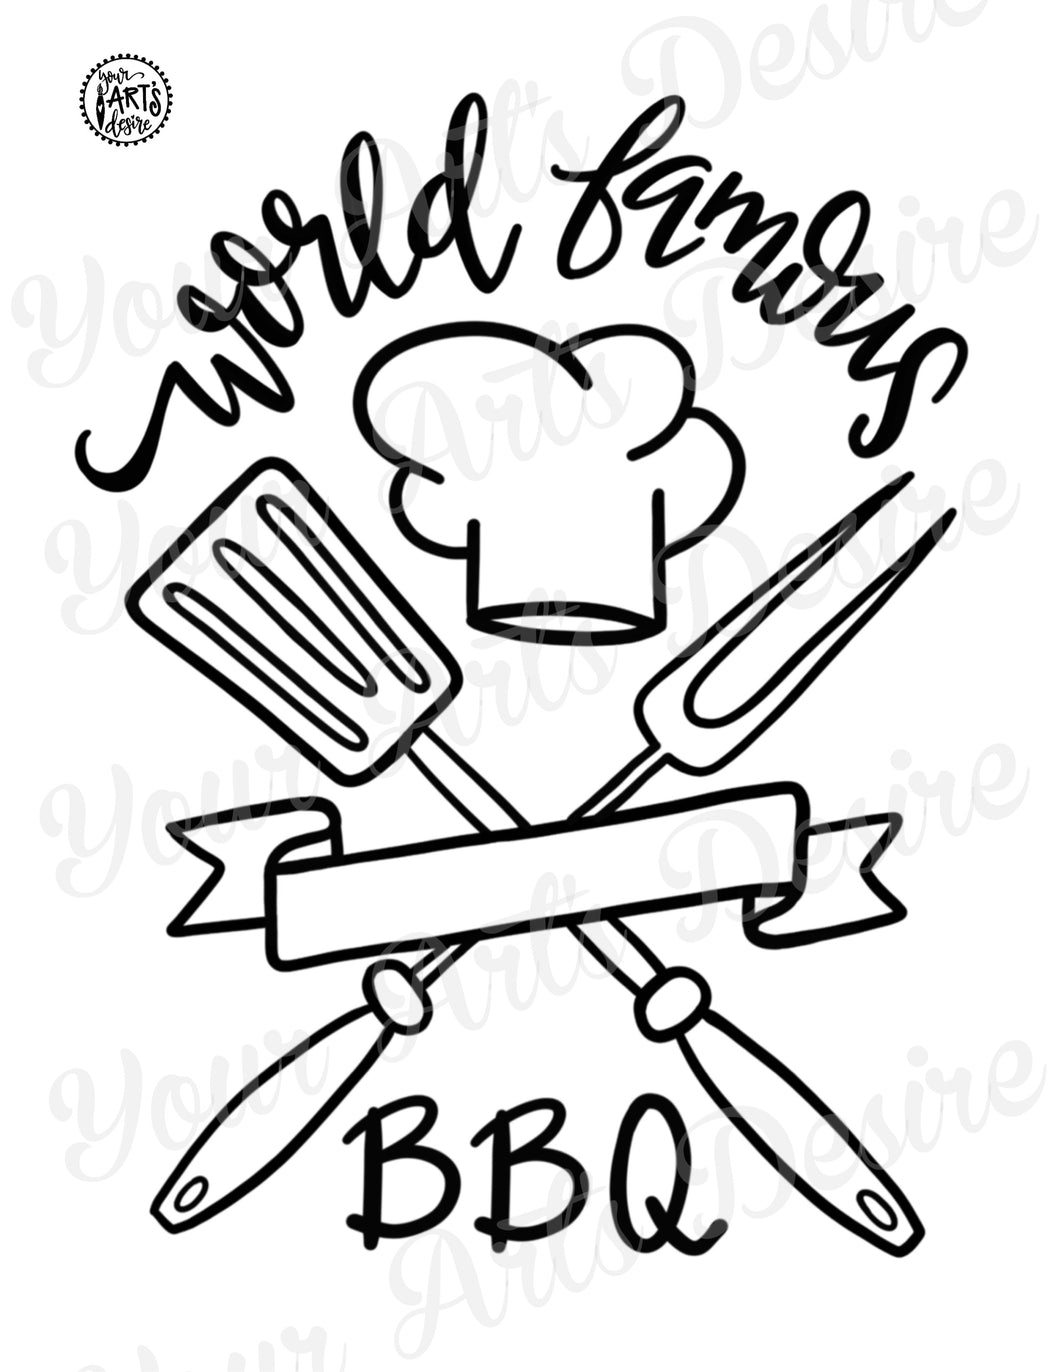 Coloring Book - World Famous BBQ